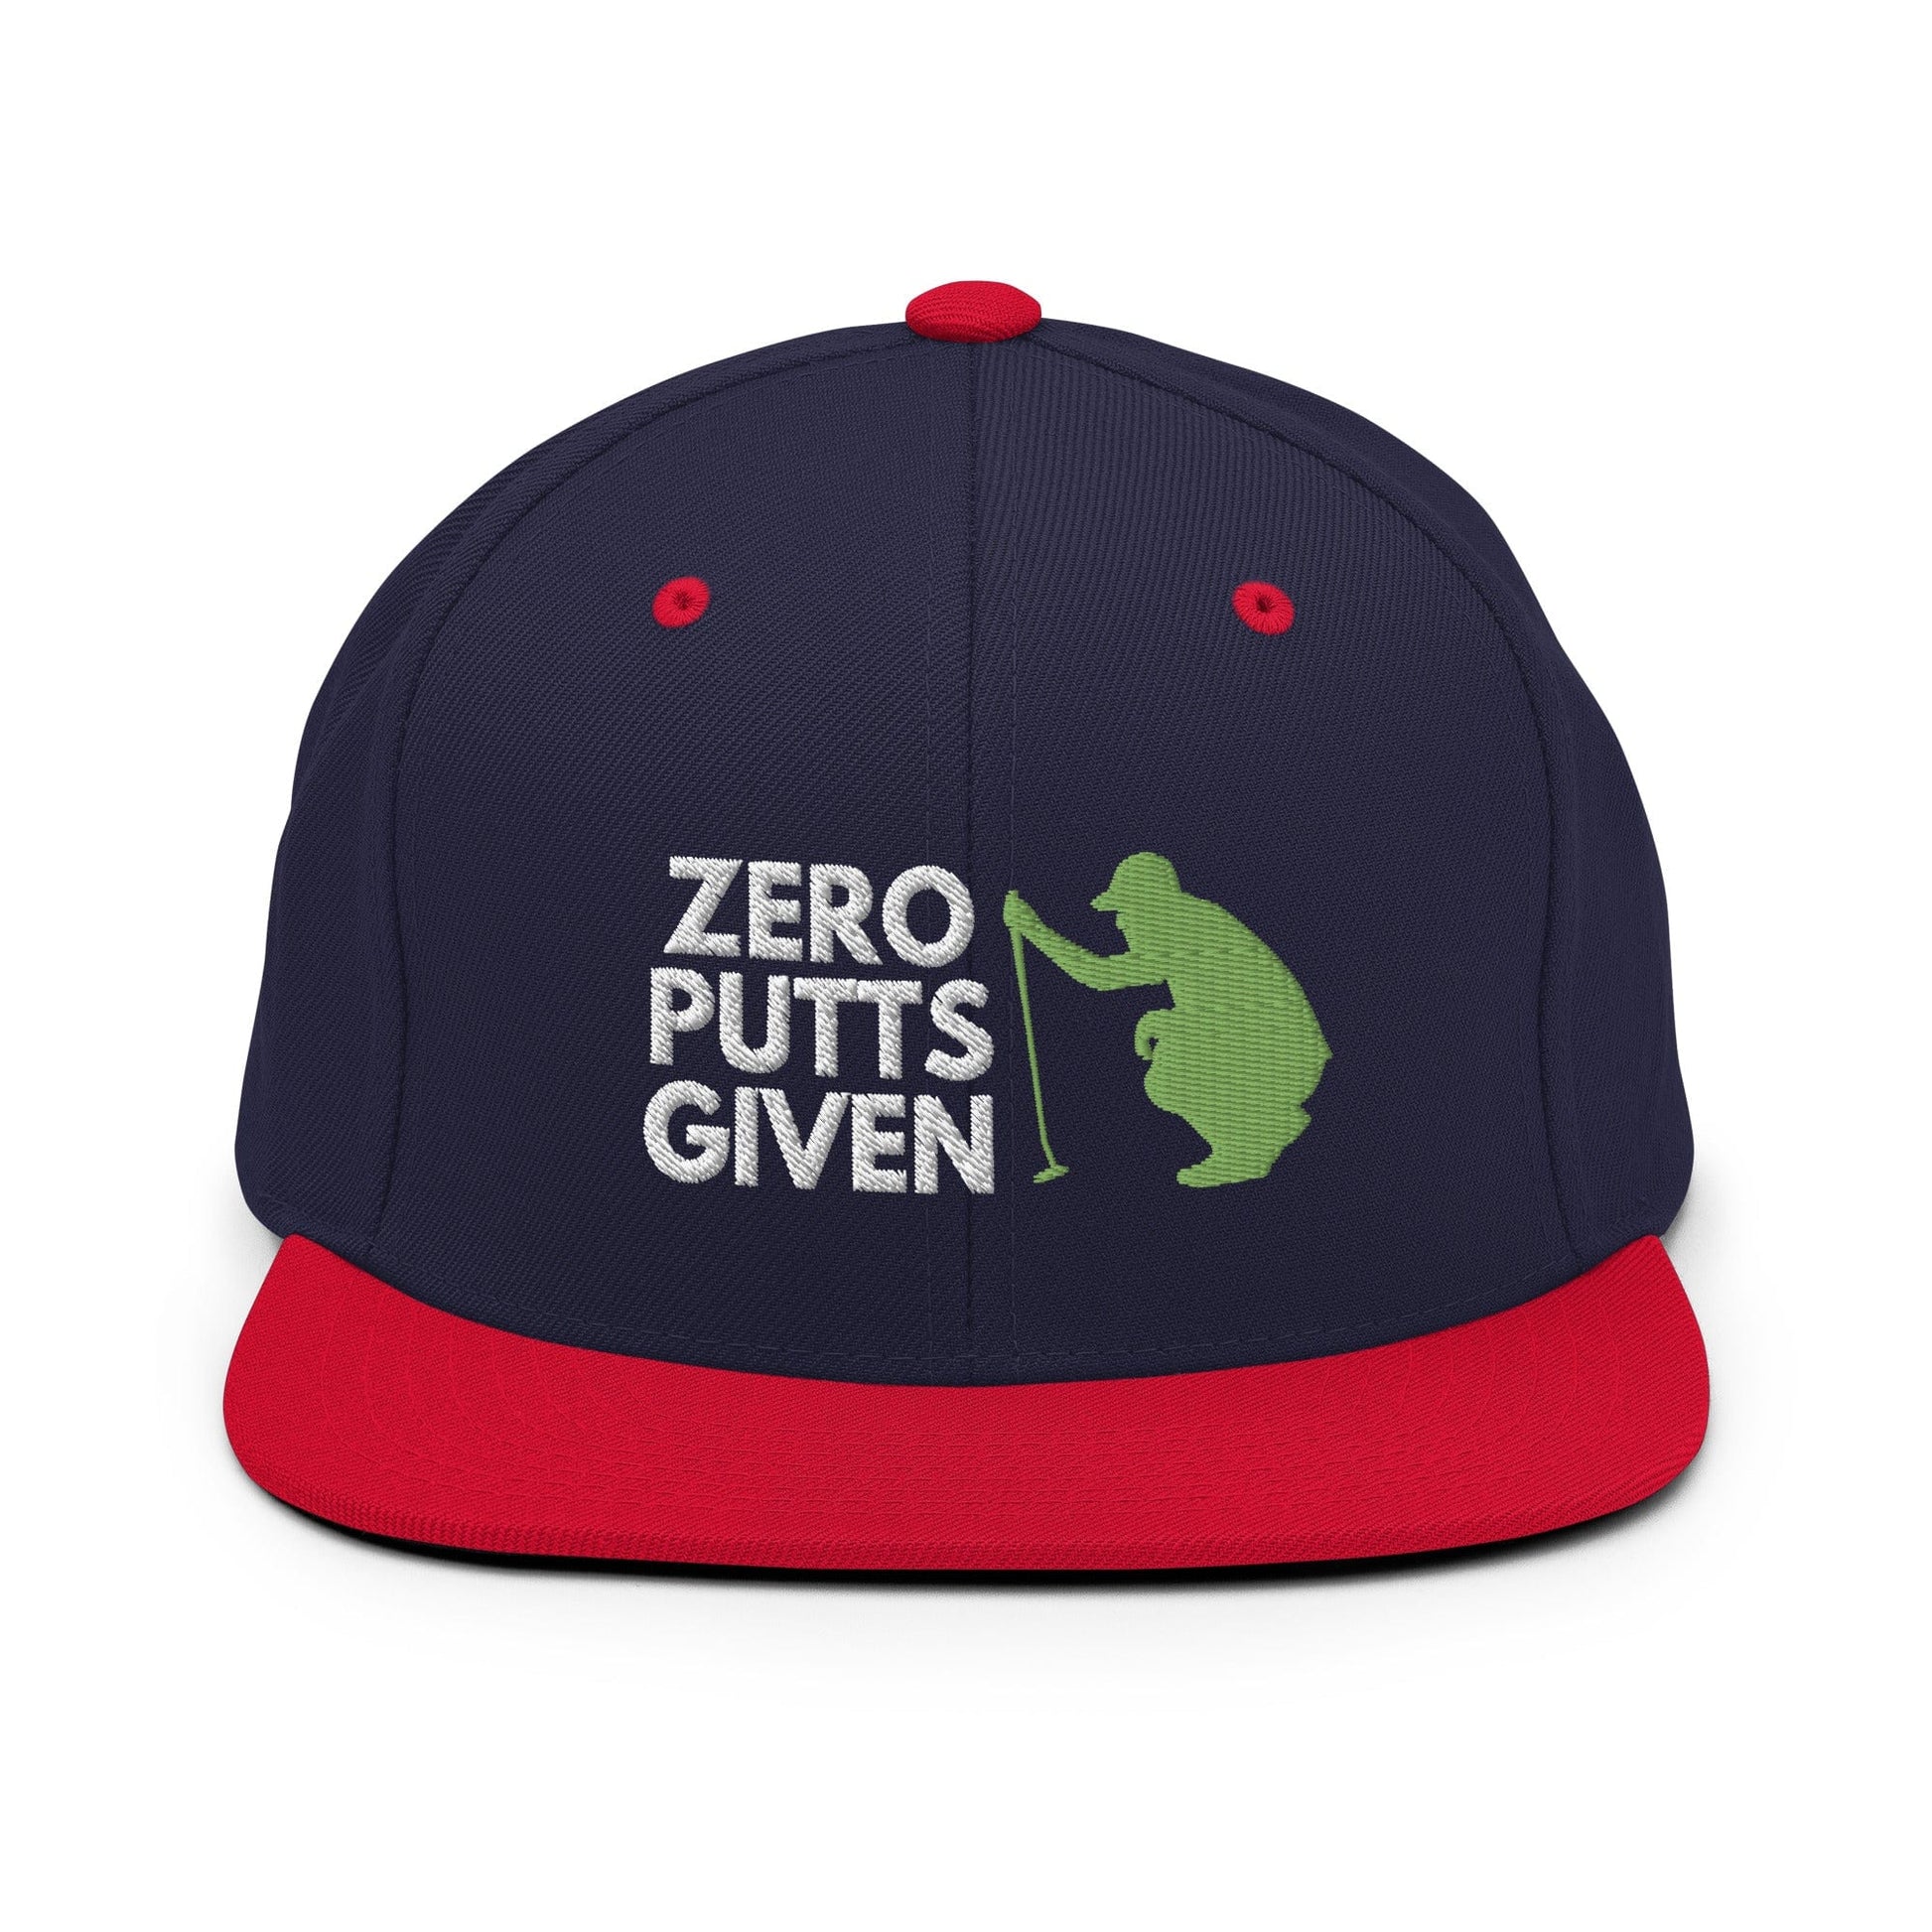 Funny Golfer Gifts  Snapback Hat Navy/ Red Zero Putts Given Hat Snapback Hat